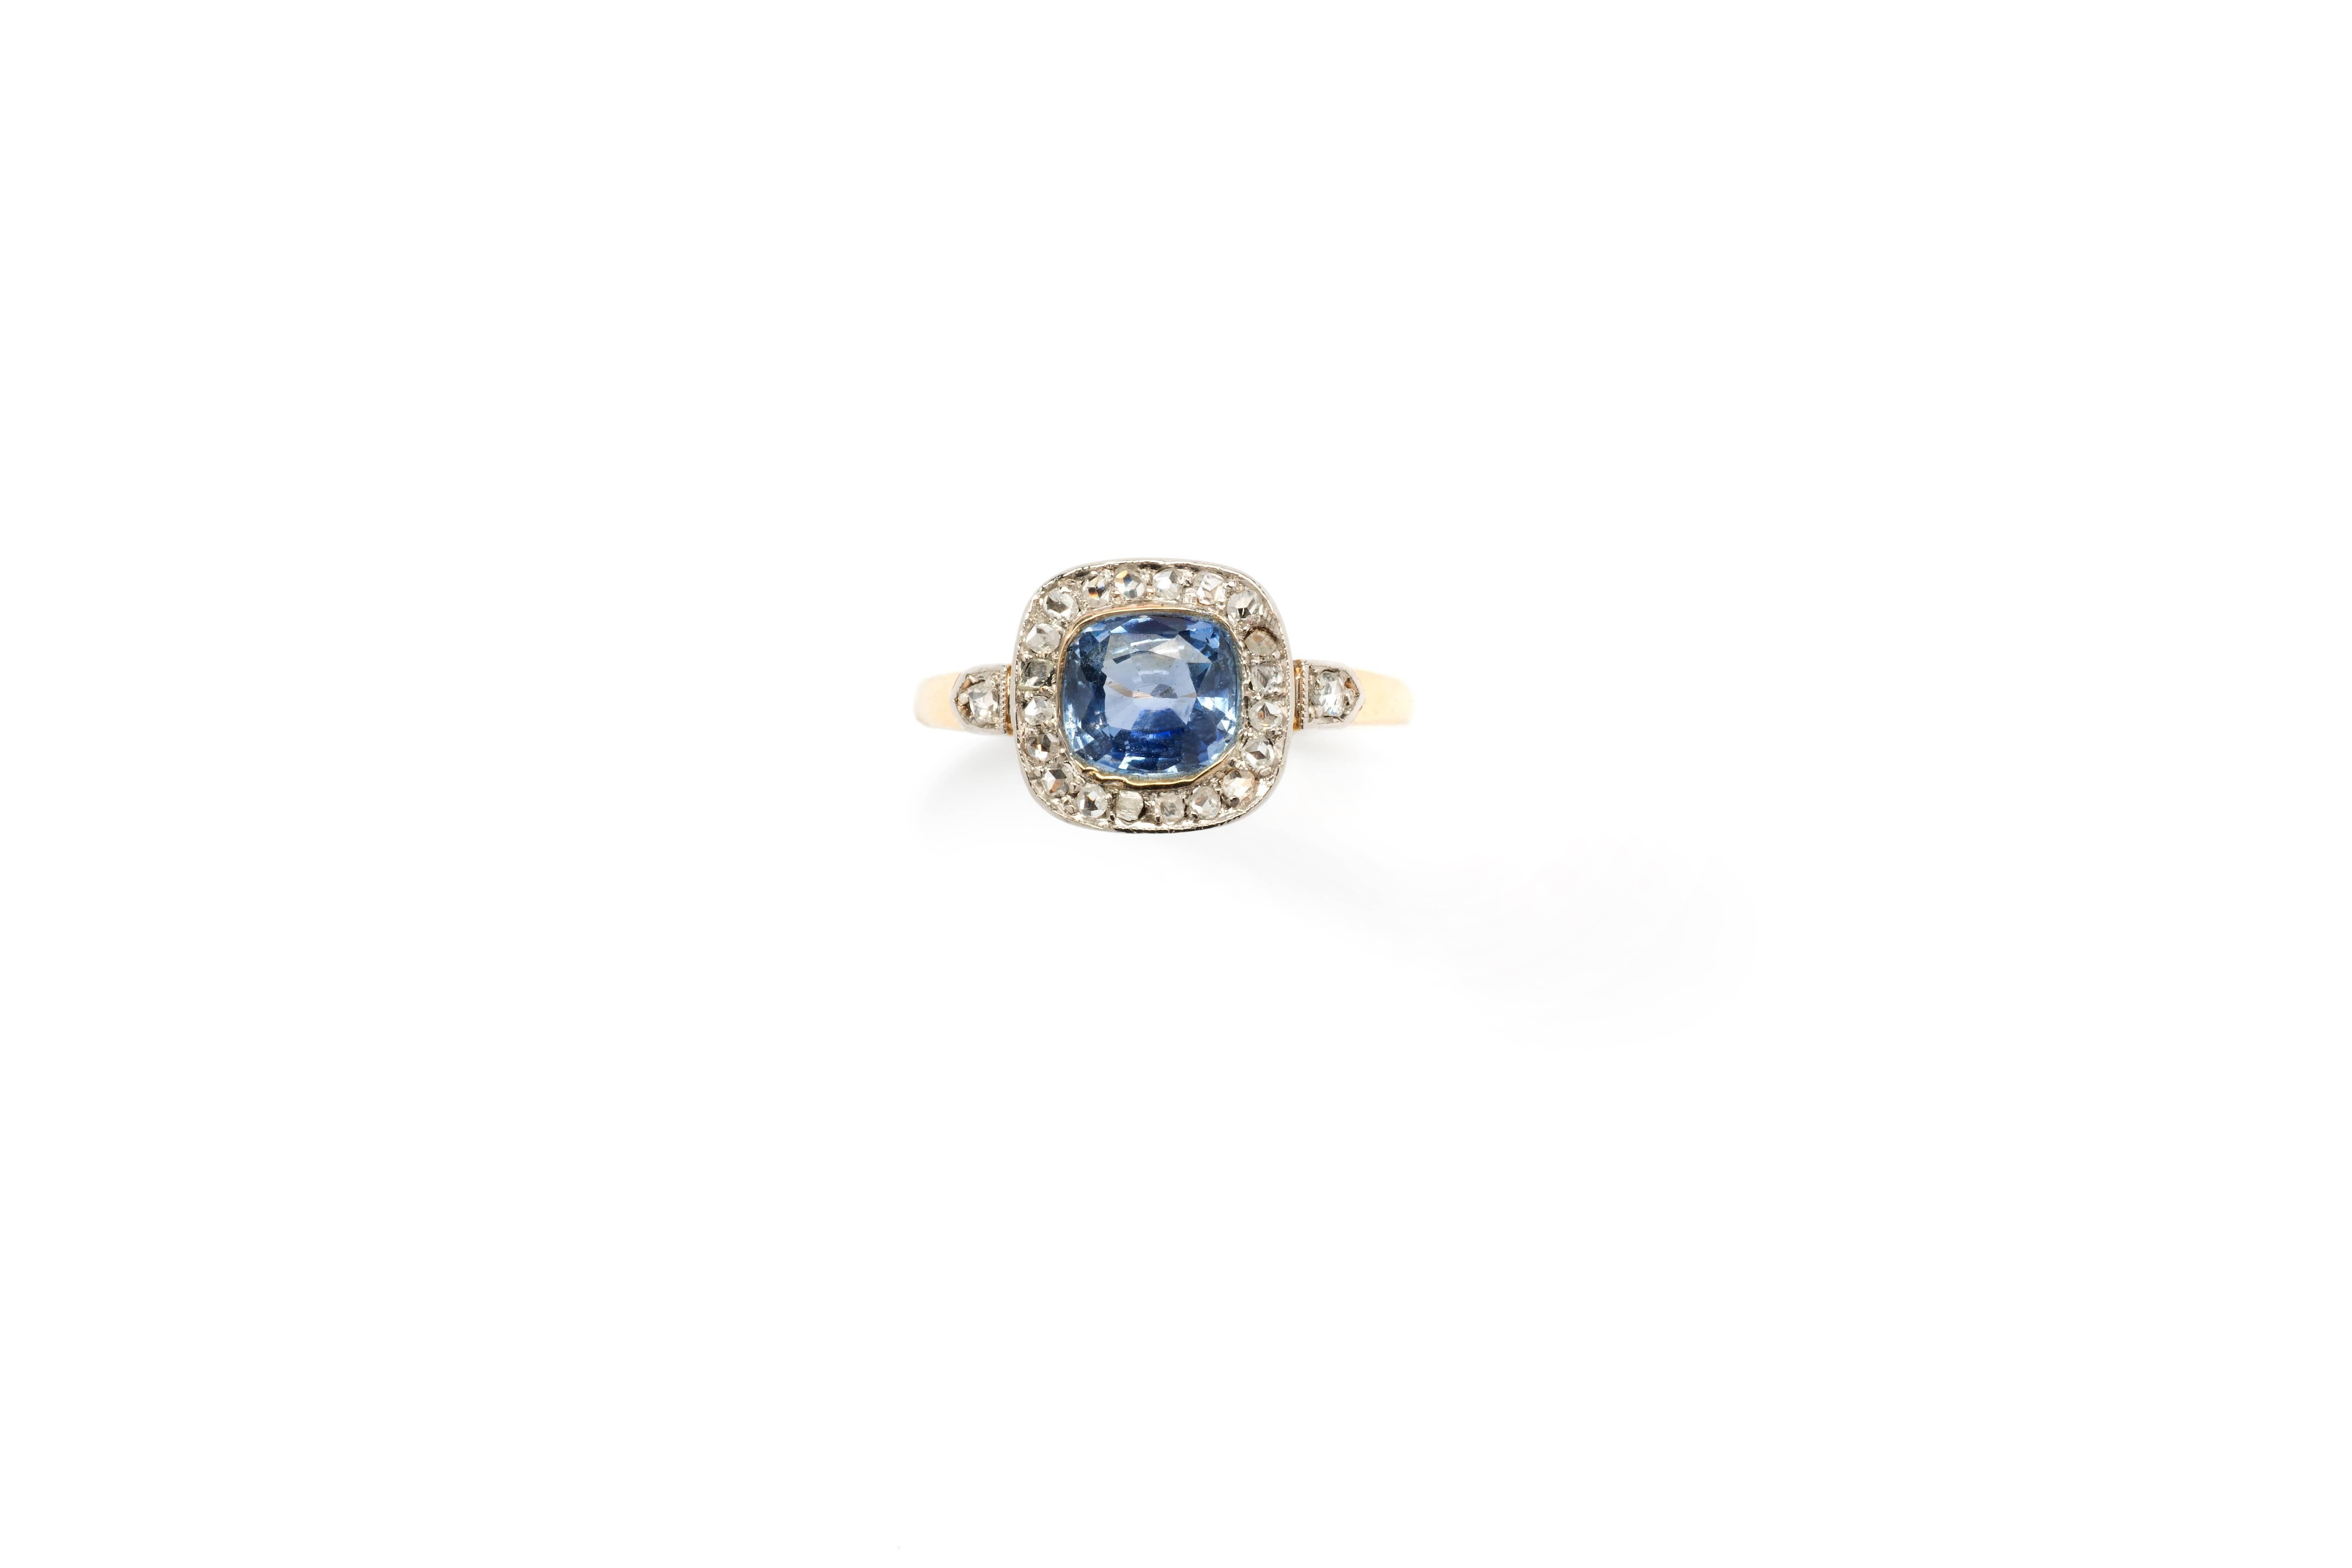 Set with Ceylon sapphire weighing ca. 1,56 ct., surrounded by 22 rose-cut diamonds weighing approximately 0,16 ct. Mounted in 14K yellow- and white gold. Marked with the purity: 585. Total weight: 3,3 g. Measurements: 0.47 x 0.47 in ( 1,2 x 1,2 cm